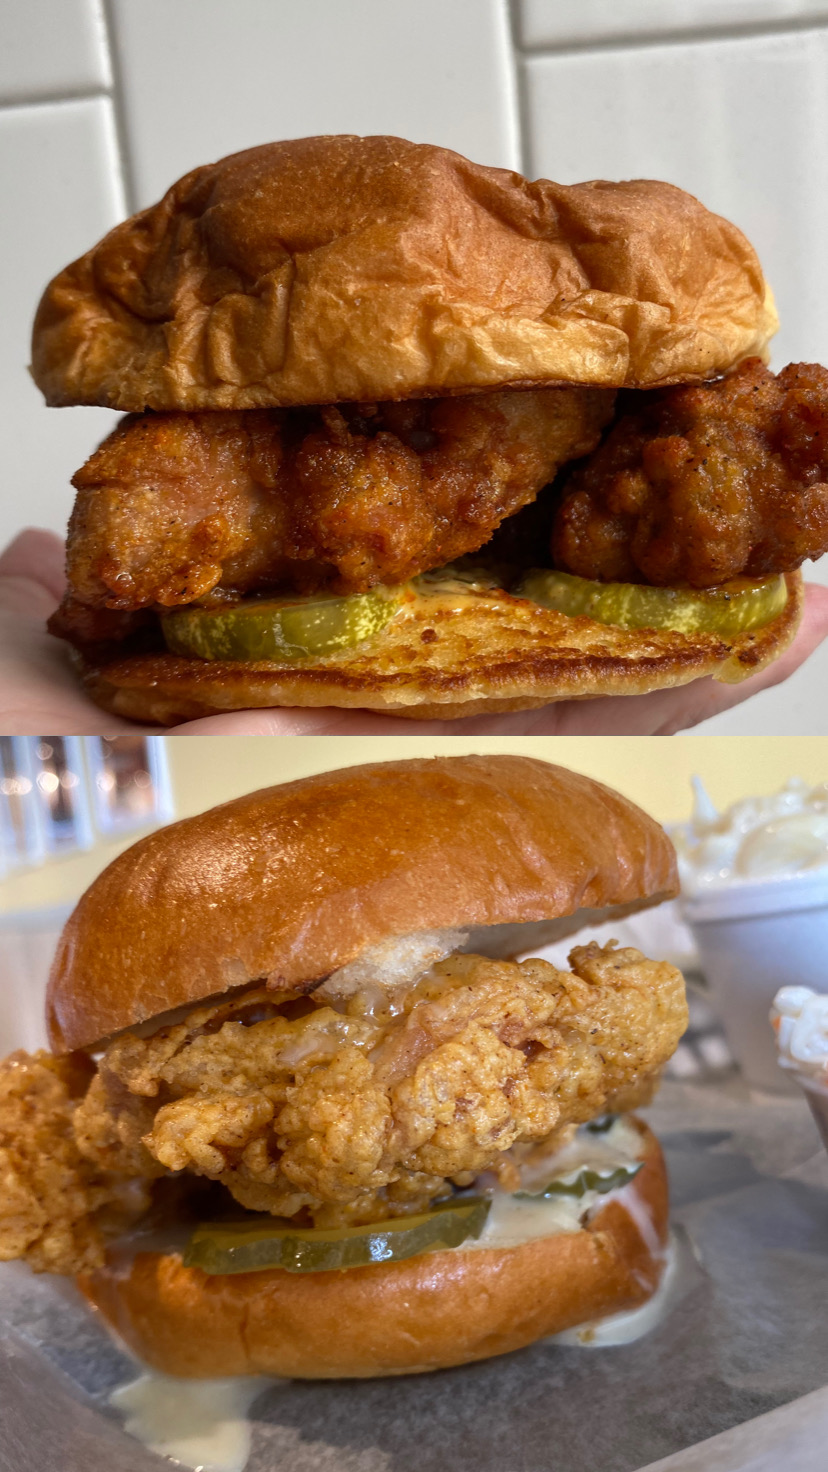 A Review of Winston-Salem’s Newest Chicken Sandwiches